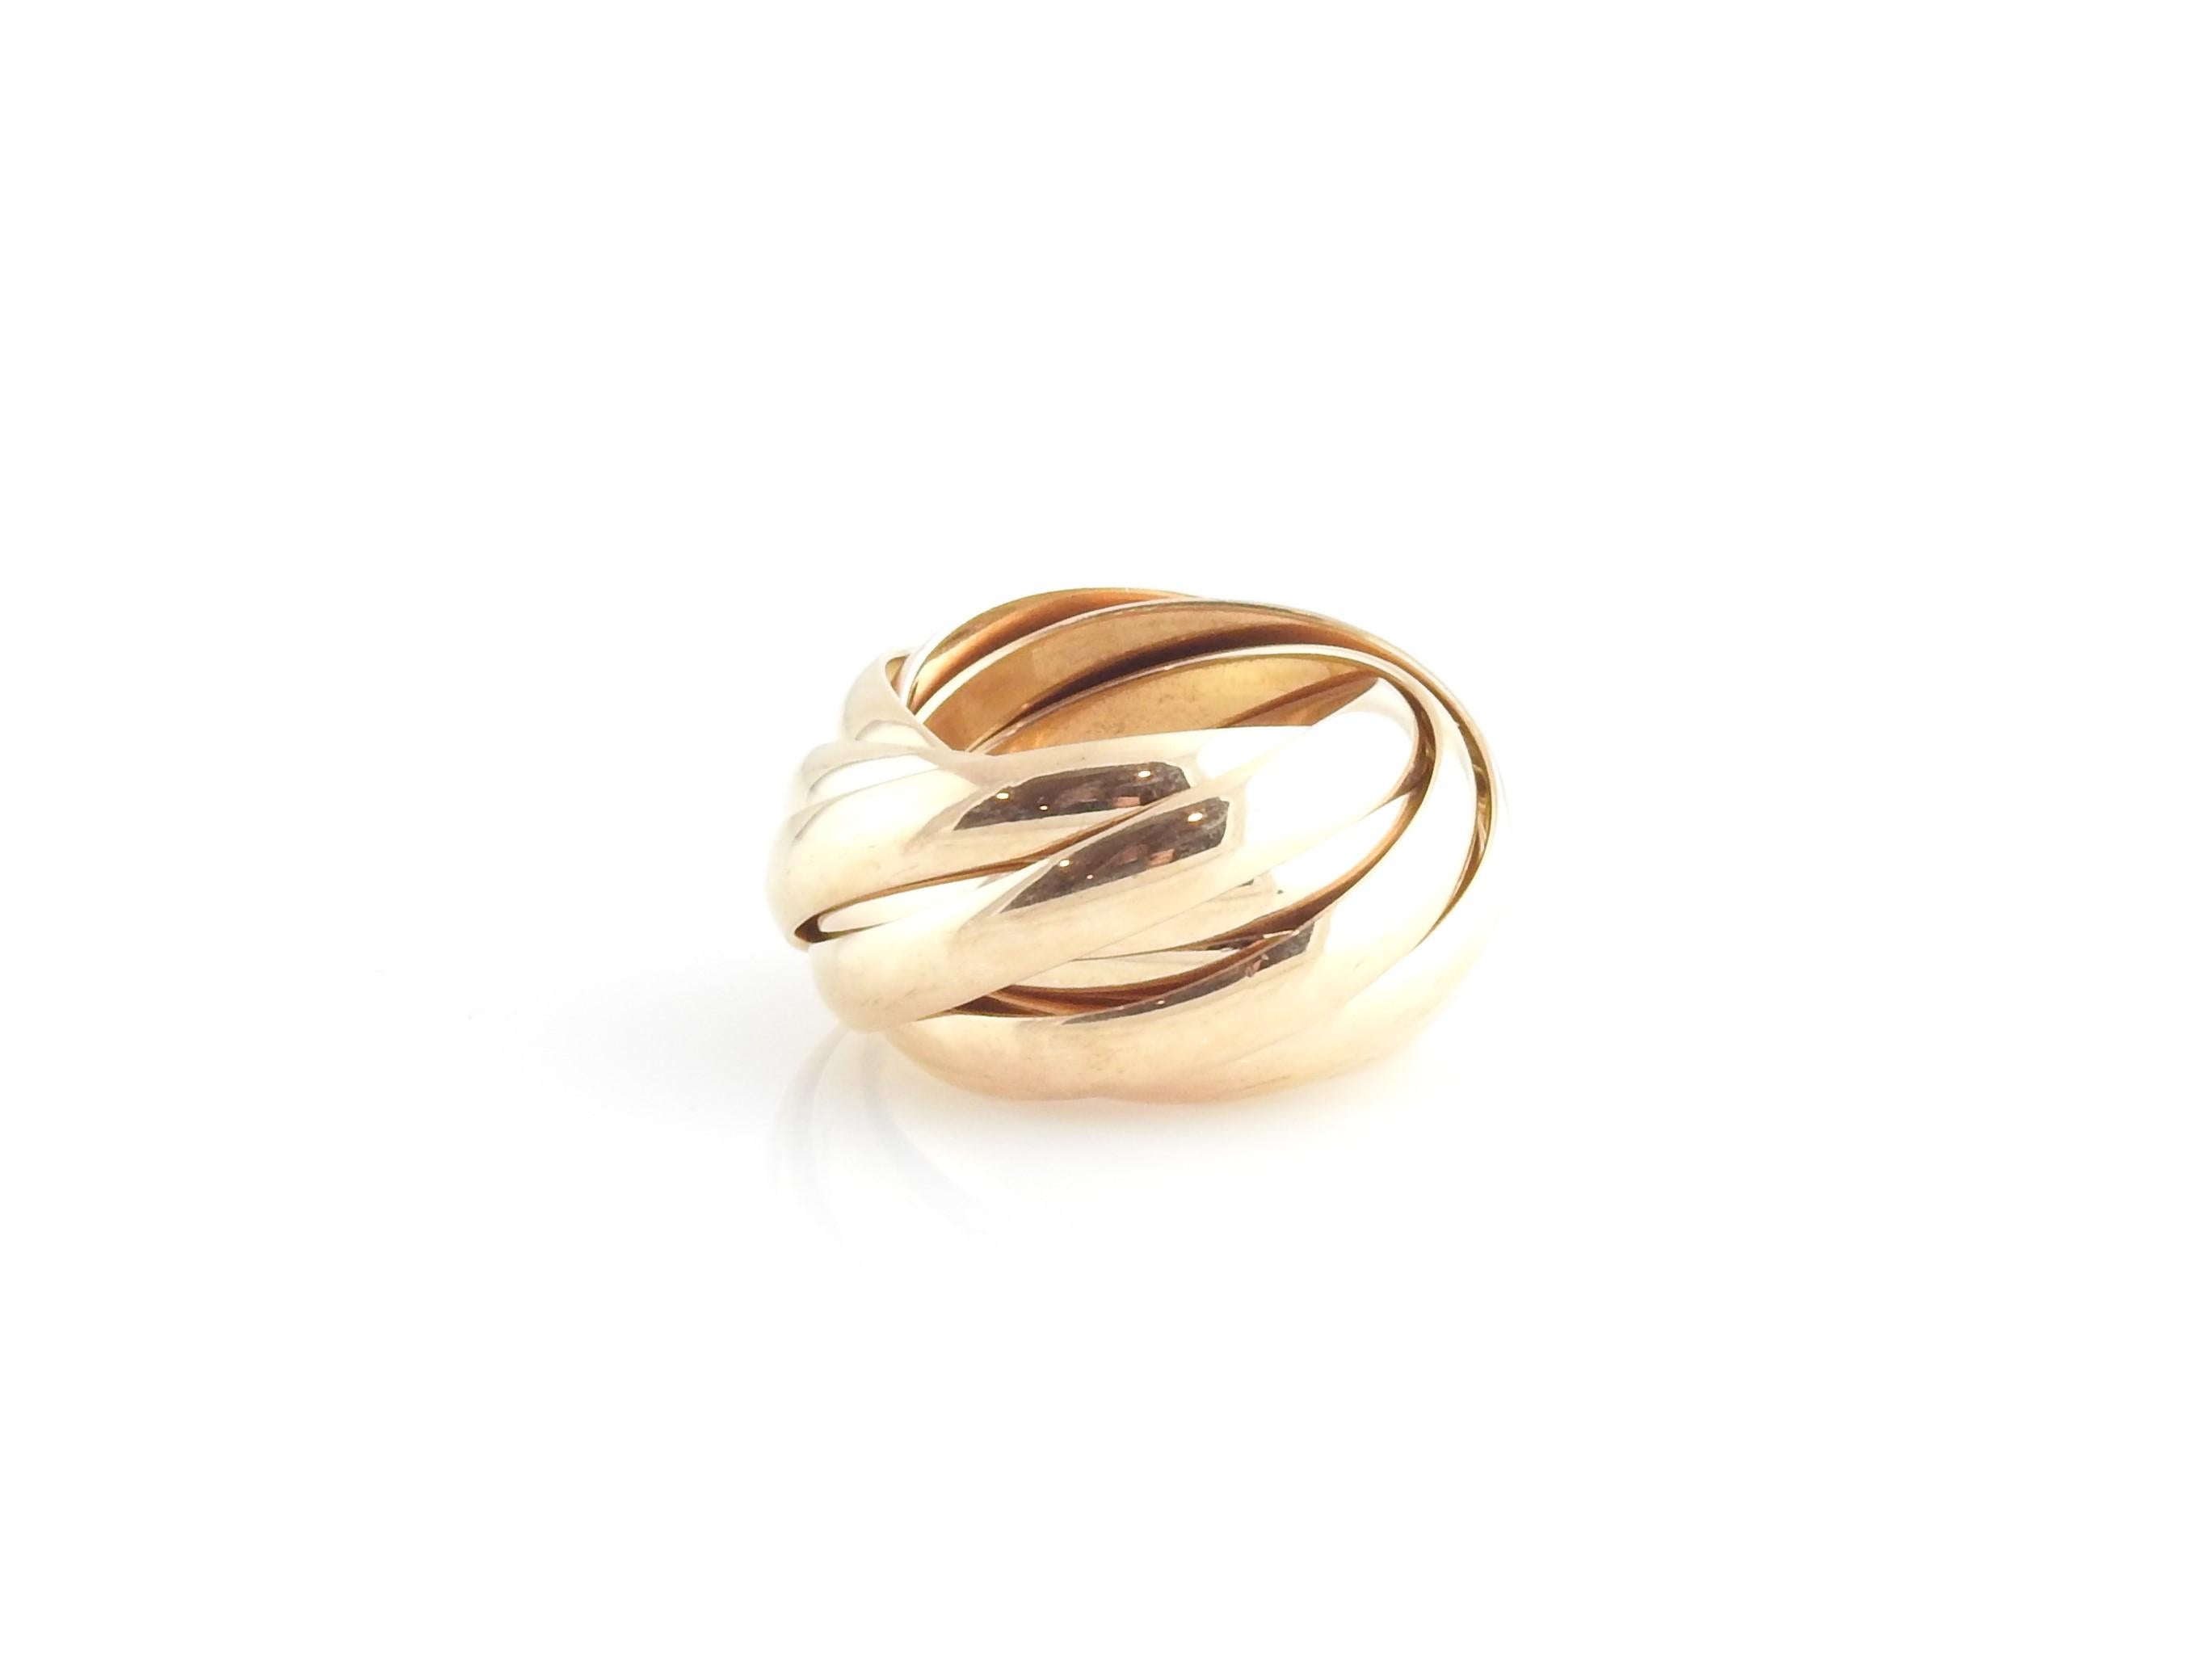 Vintage Tiffany and Co. Paloma Picasso Melody Nine Band Ring Size 6.5

This elegant ring is crafted from nine interlocking bands beautifully detailed in 18K yellow gold. Each band measures 4 mm.

Ring Size: 6.5

Weight: 18.3 dwt. / 28.5